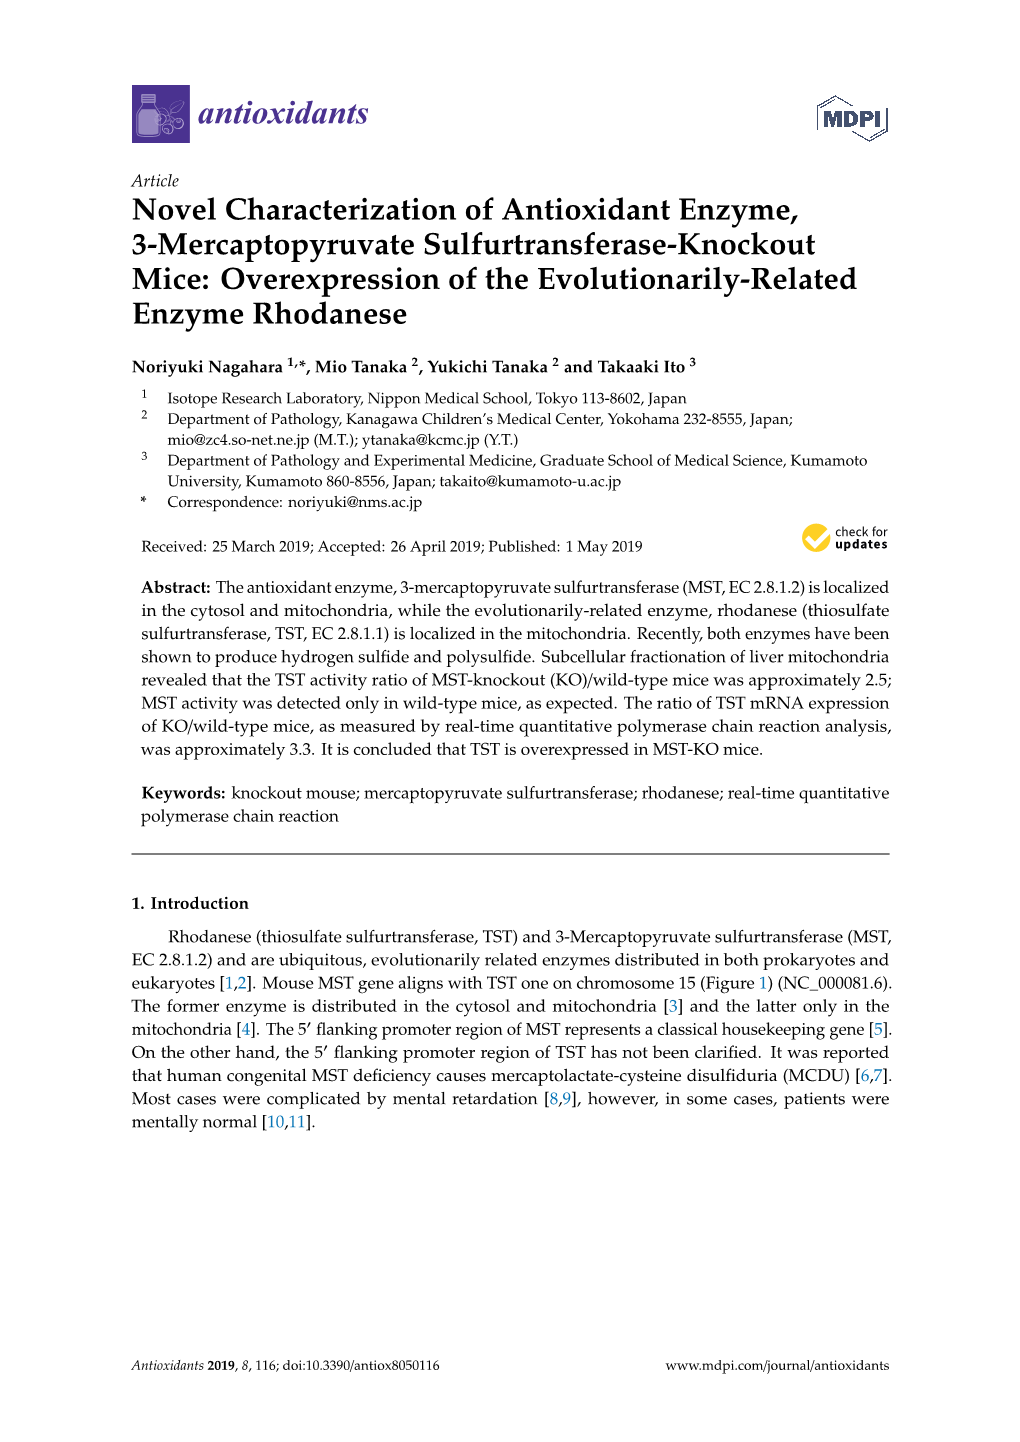 Novel Characterization of Antioxidant Enzyme, 3-Mercaptopyruvate Sulfurtransferase-Knockout Mice: Overexpression of the Evolutionarily-Related Enzyme Rhodanese